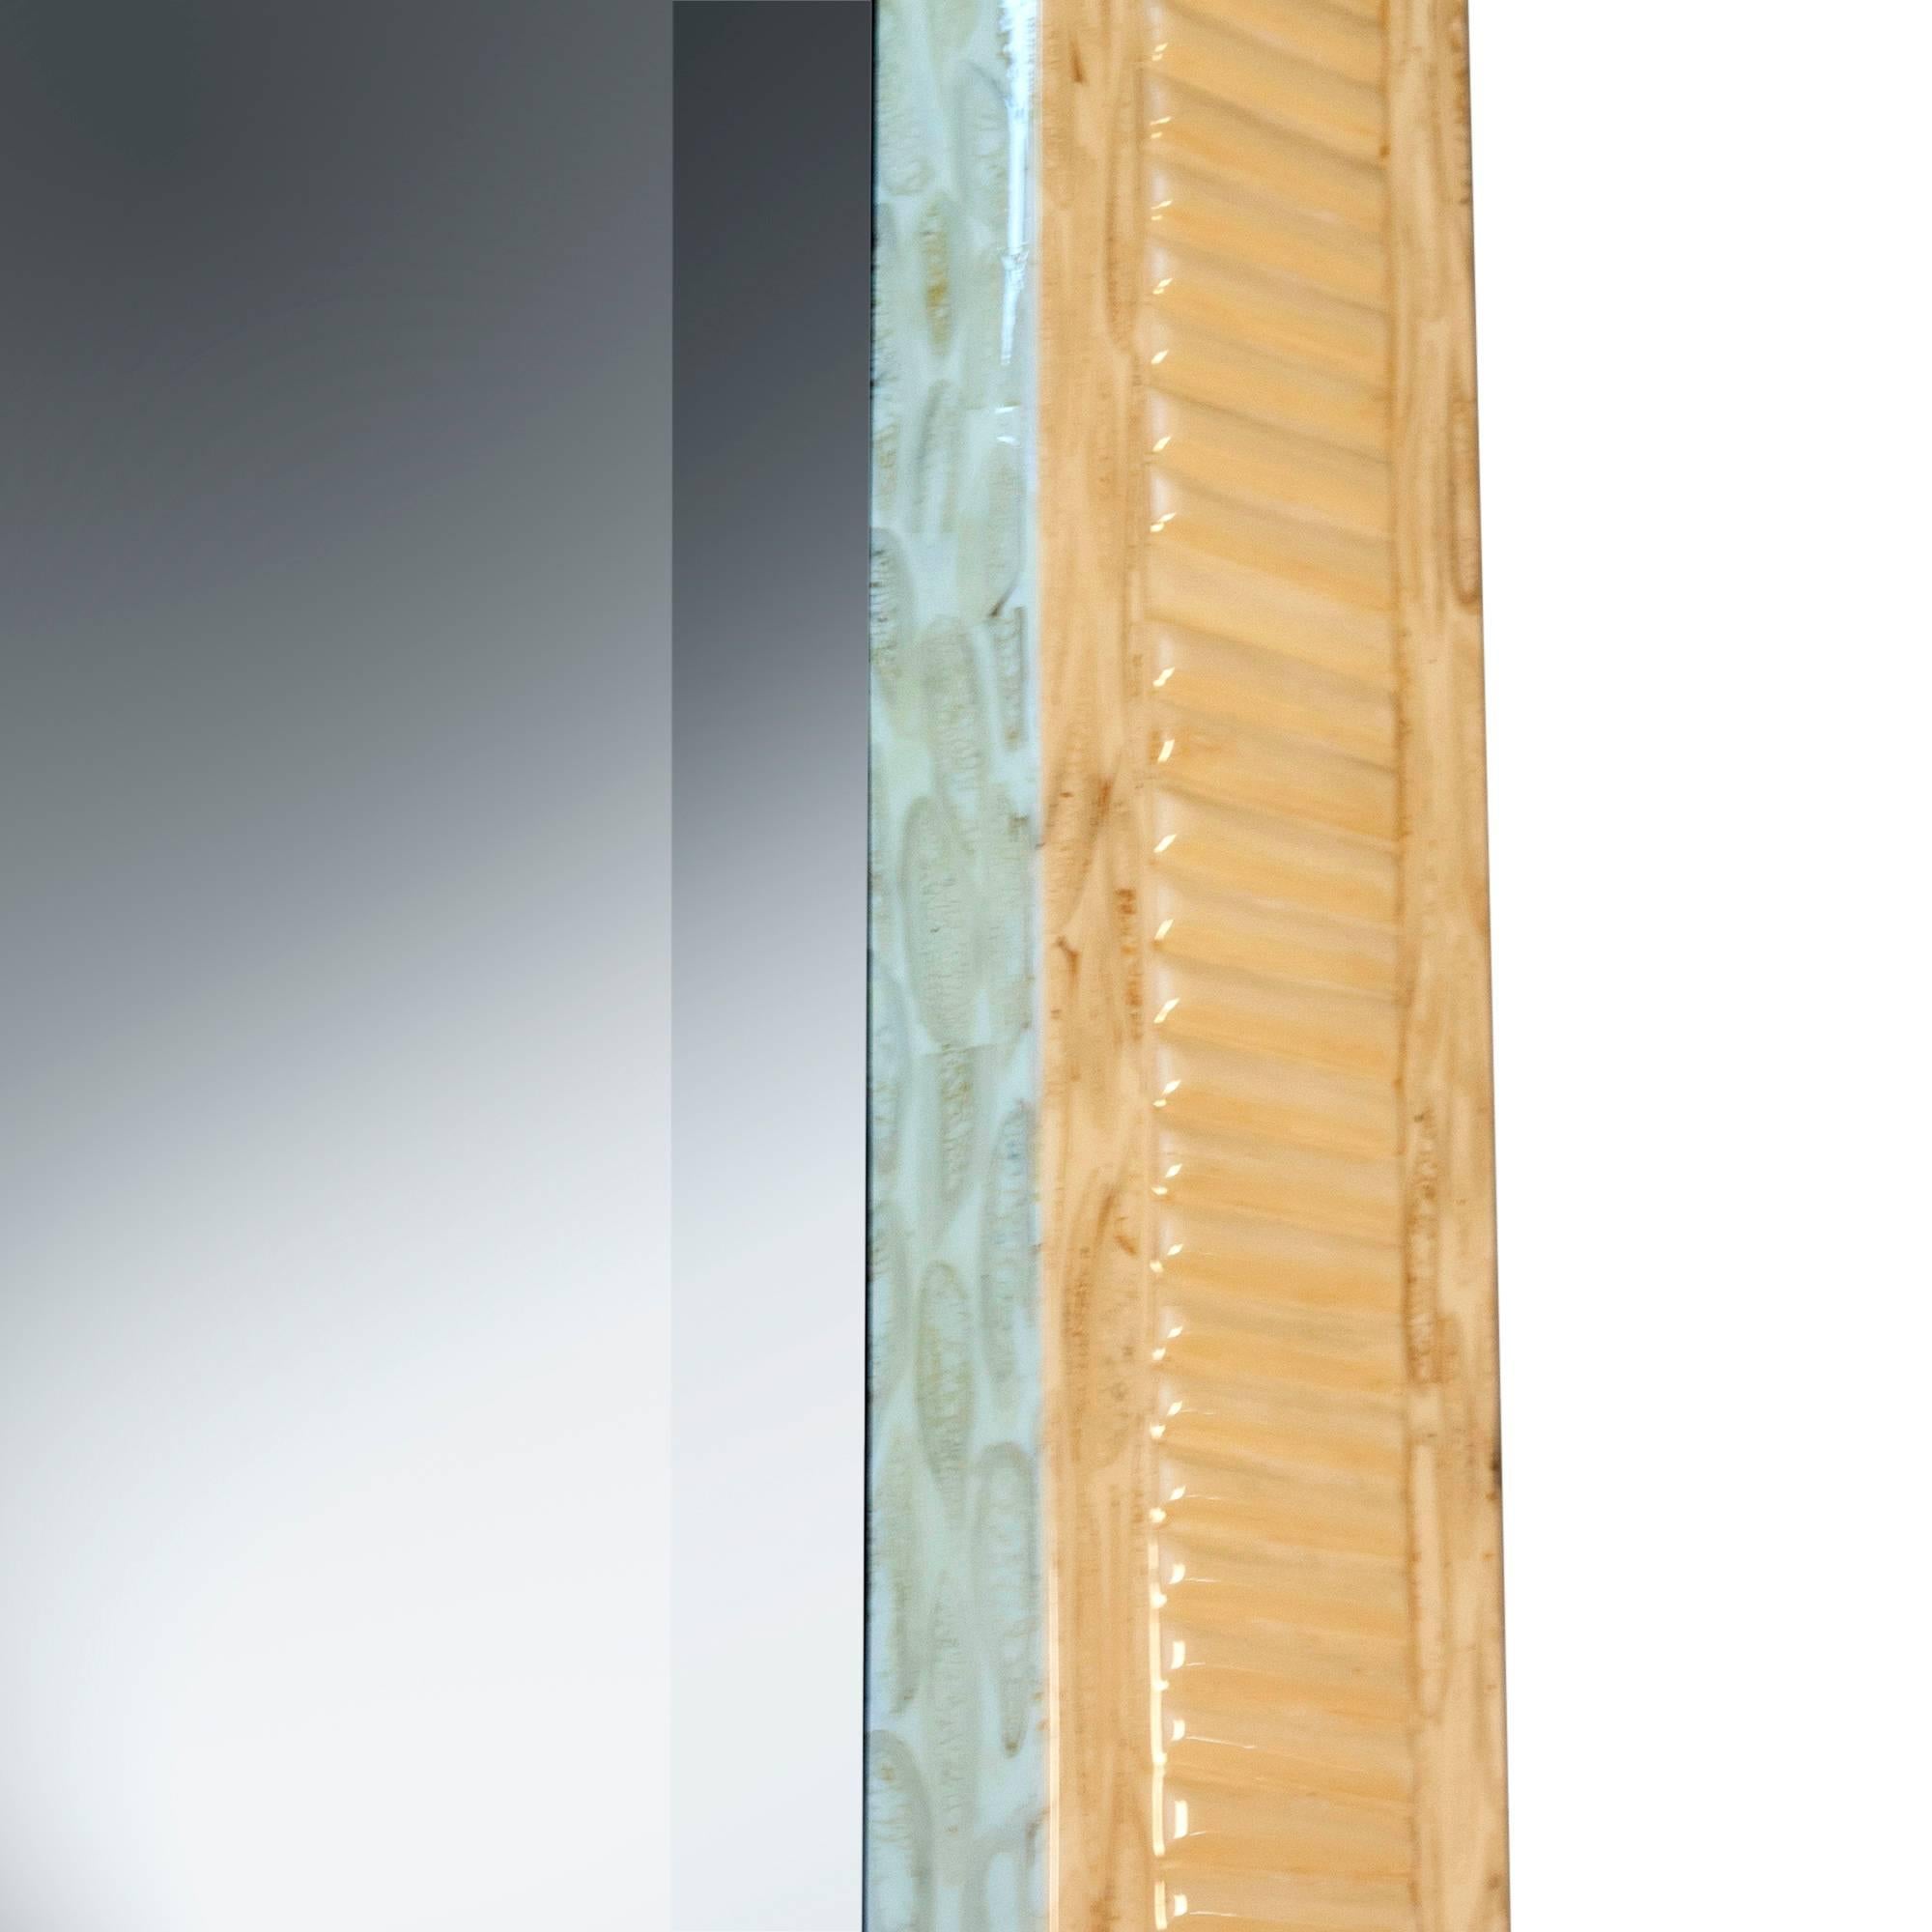 Rectangular arch top bone-color lacquered mirror, the frame with ripple texturing, by Enrique Garcez, Columbian for the American market, in the style of Karl Springer, marked to backside. Measures: 66 1/2 in x 30 1/4 in, depth 1 1/2 in. (sats)